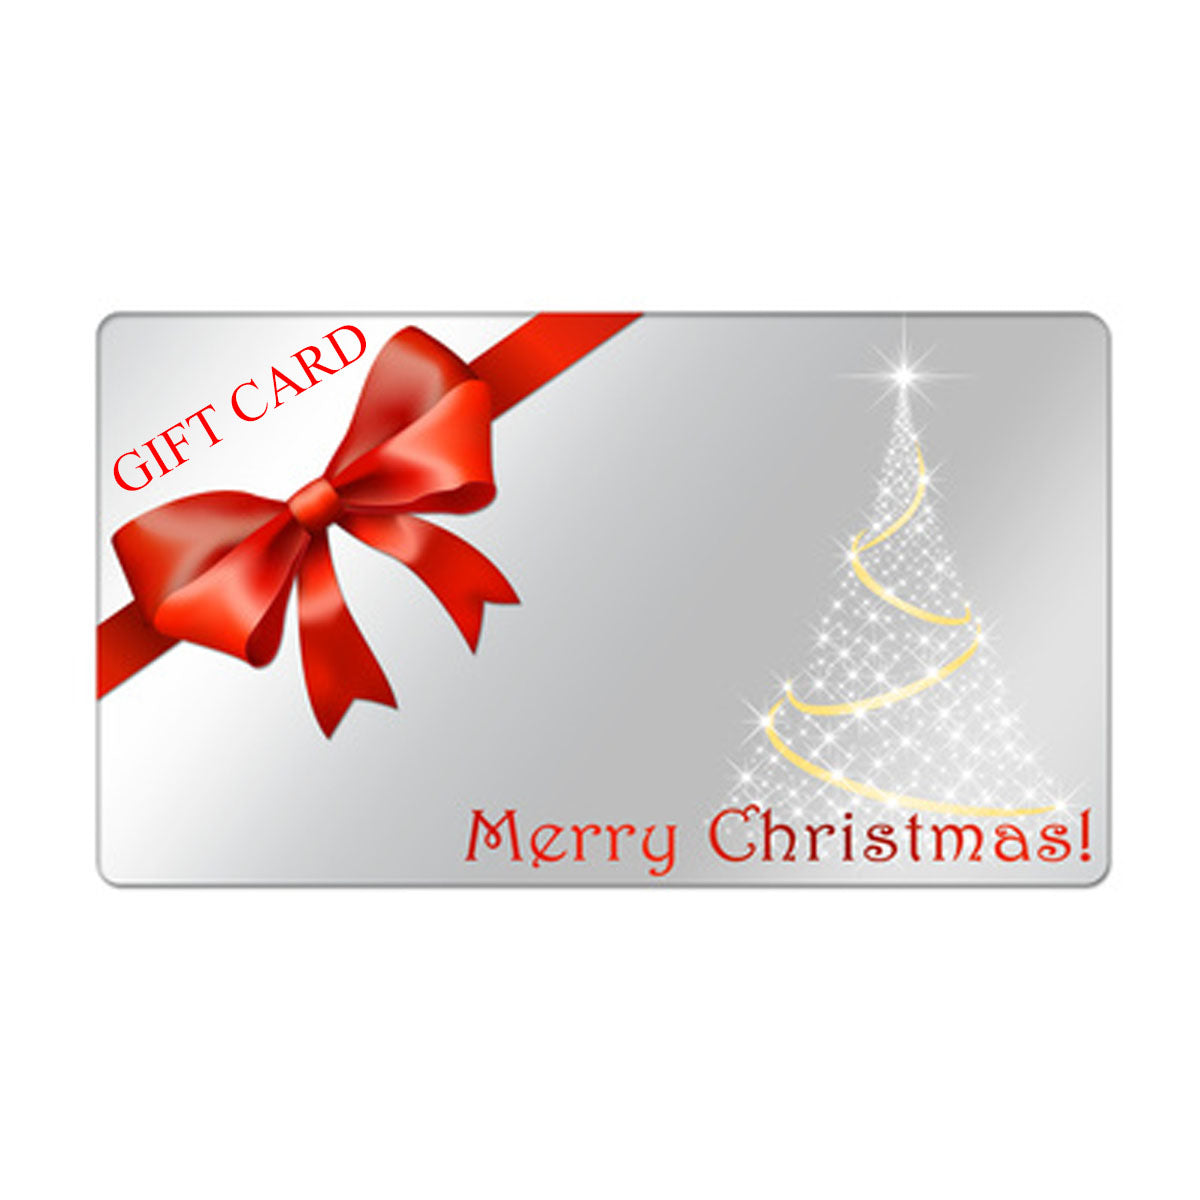 Merry Christmas Gift Card - Southern Grace Creations